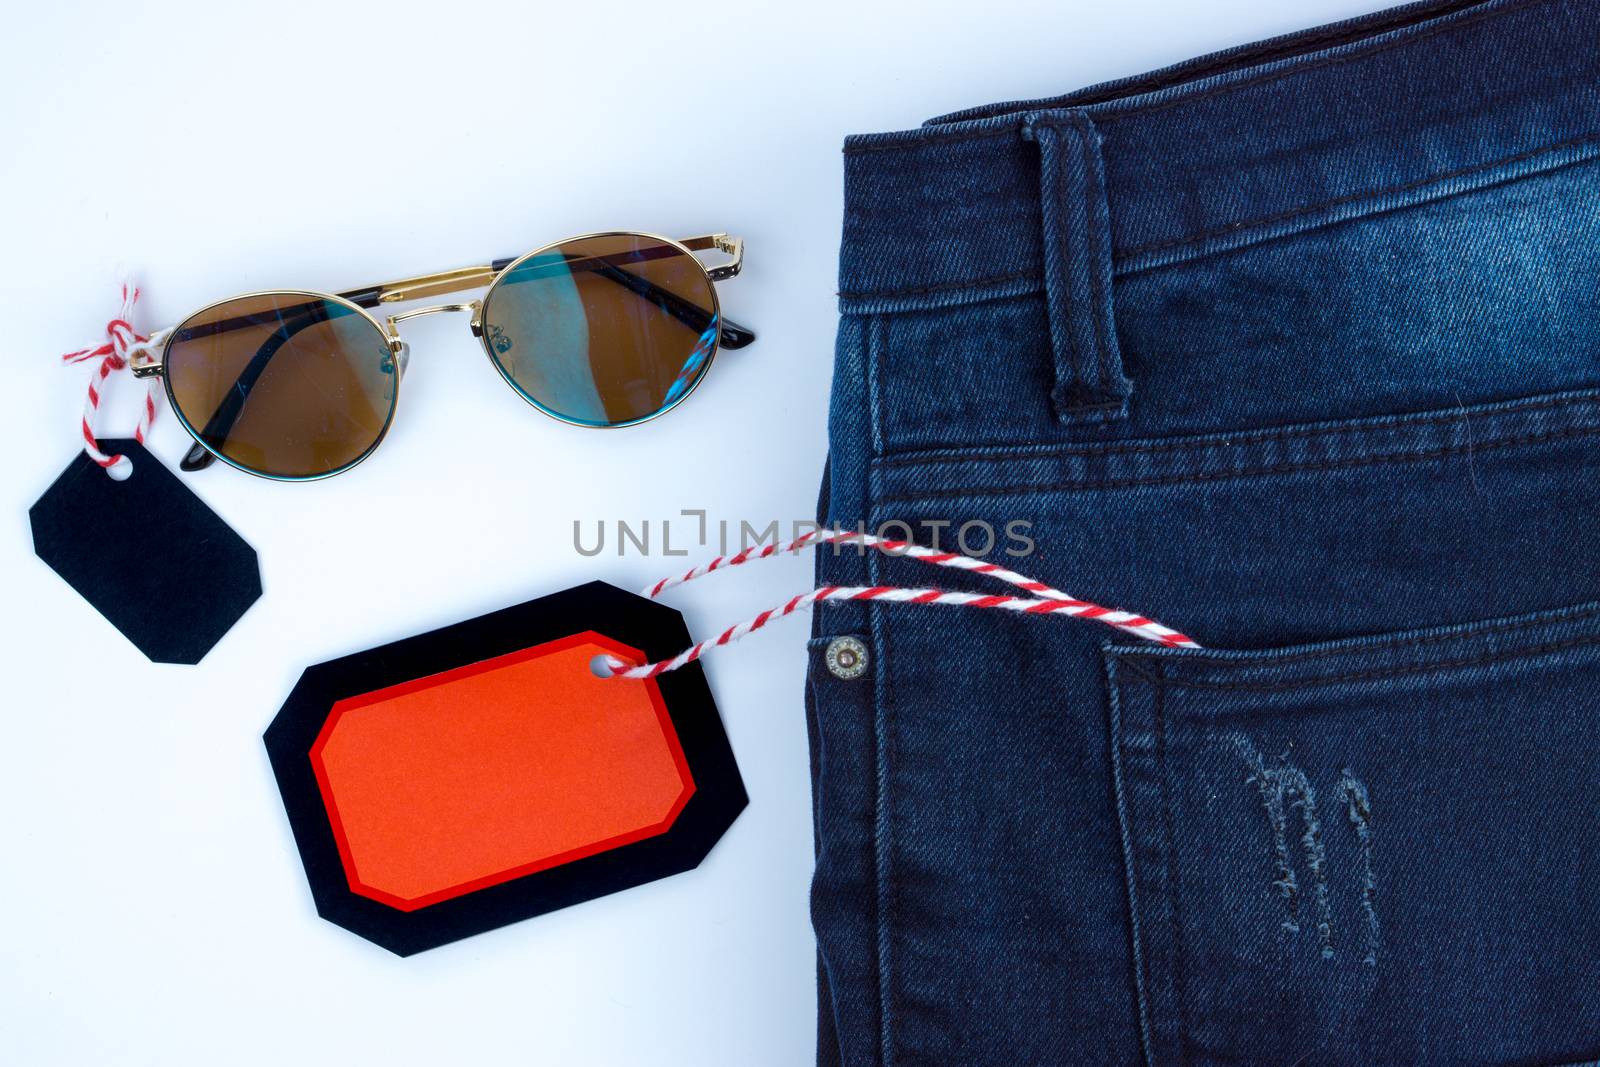 Online shopping of China, The jeans and sunglasses and shopping tag on a white background with copy space for text. 11.11 single's day sale concept